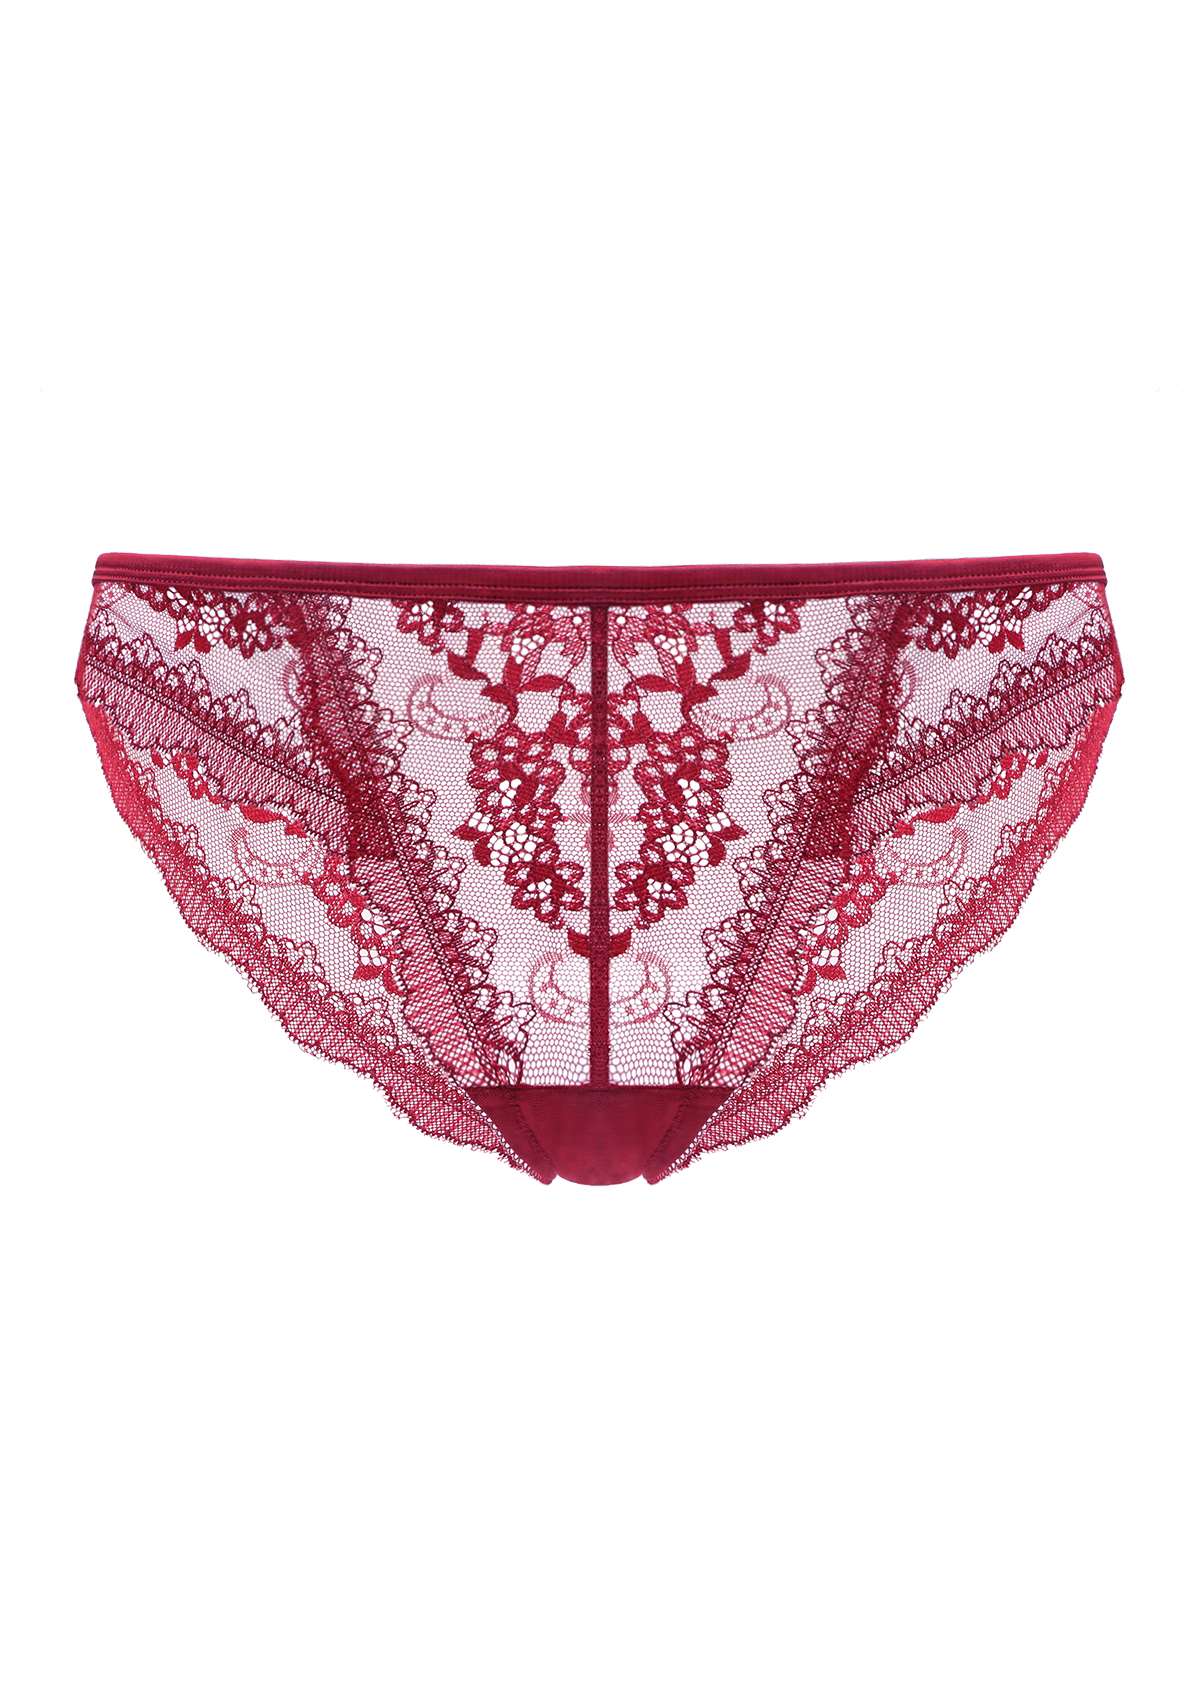 HSIA Floral Bridal Lace Back Sheer Sophisticated Cheeky Underwear  - Burgundy / XL